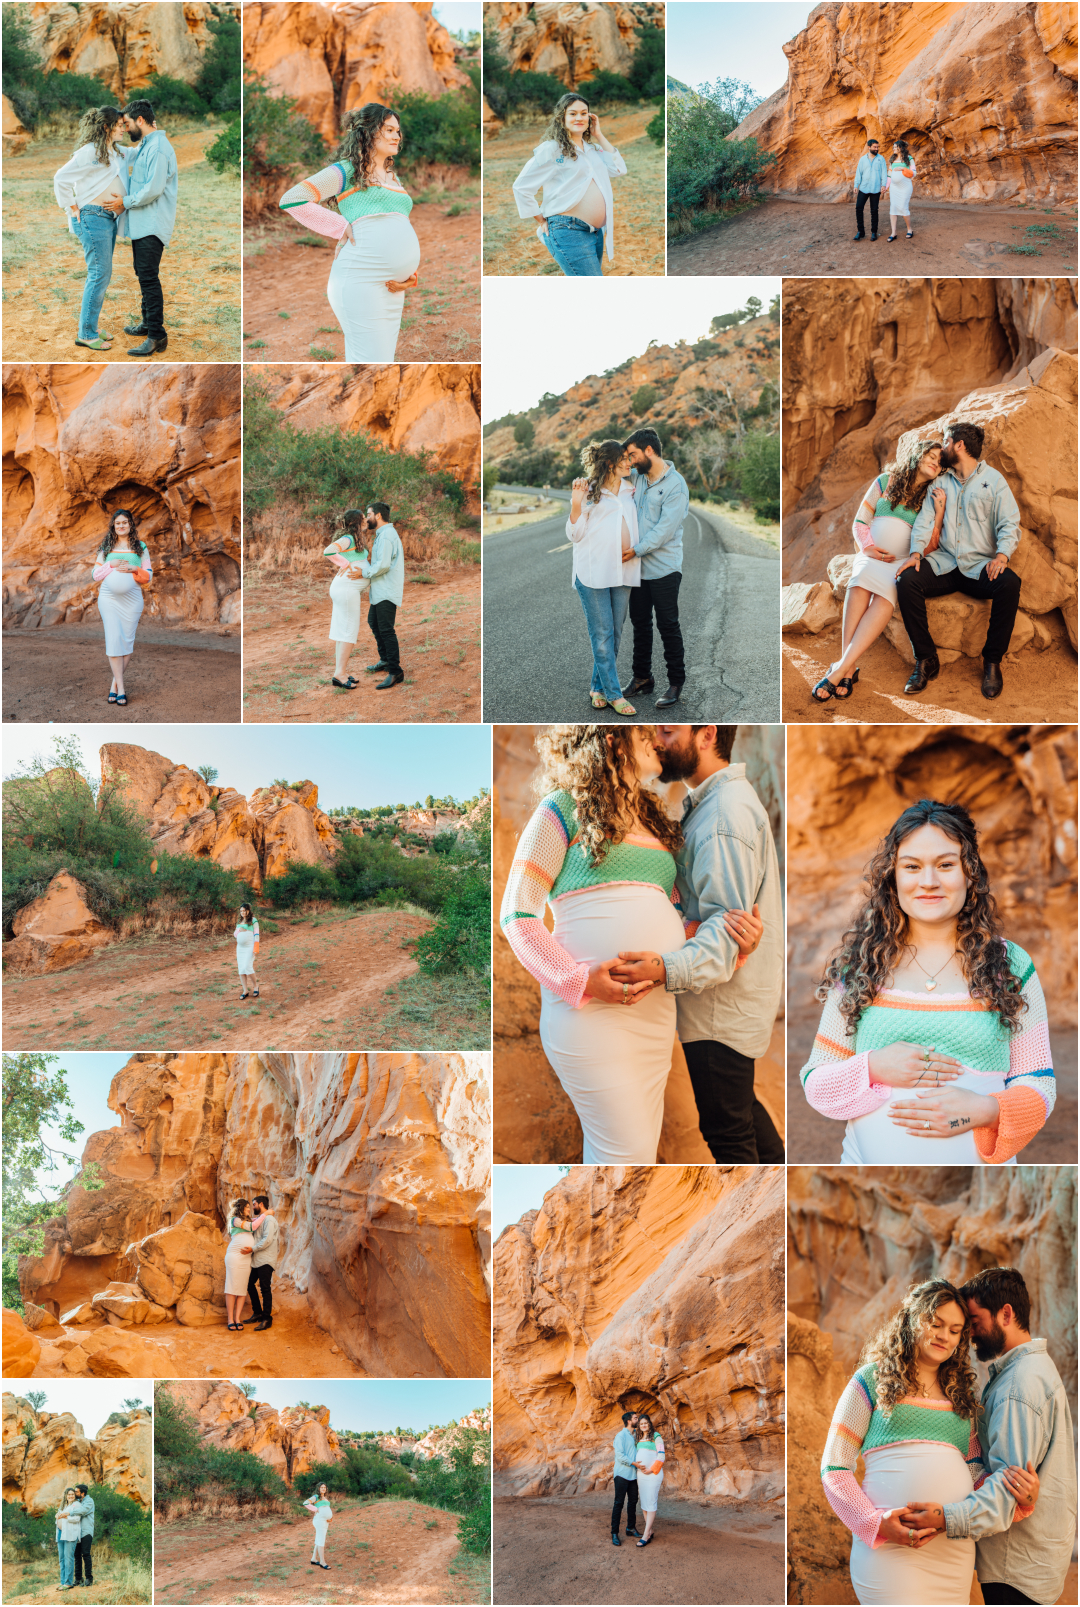 Summer Maternity Photography - Spanish Fork Red Rock